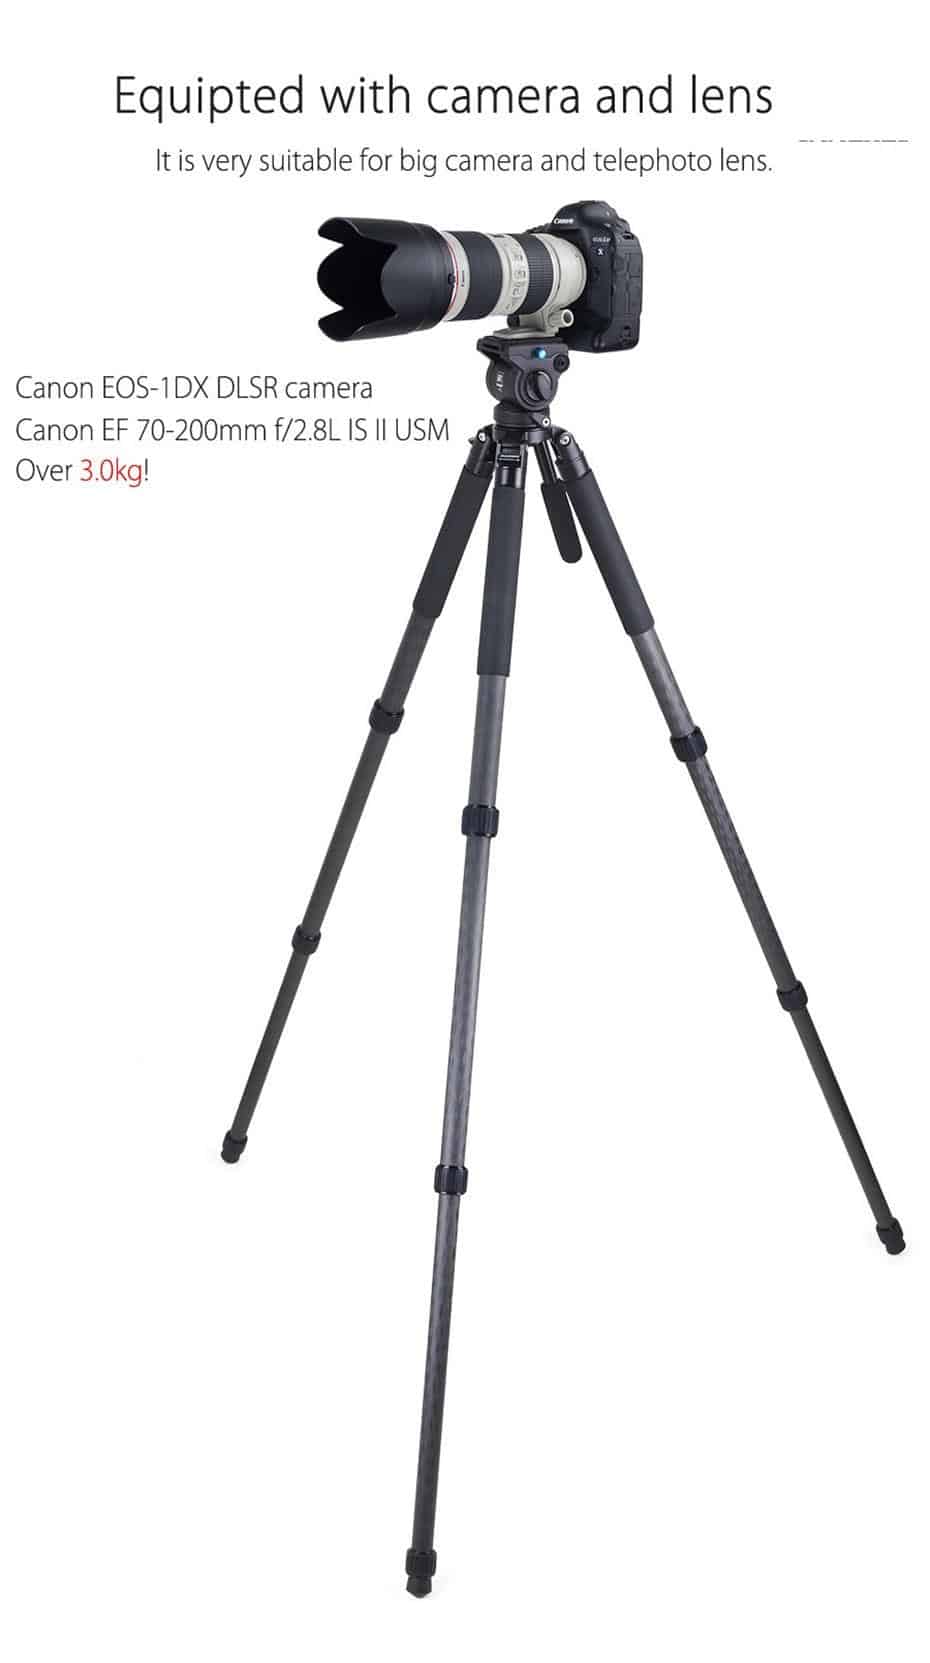 INNOREL RT80C Carbon Fiber Camera Tripod Professional Birdwatching Heavy Duty Tripod 65mm Bowl Adapter for DSLR Video Camcorder